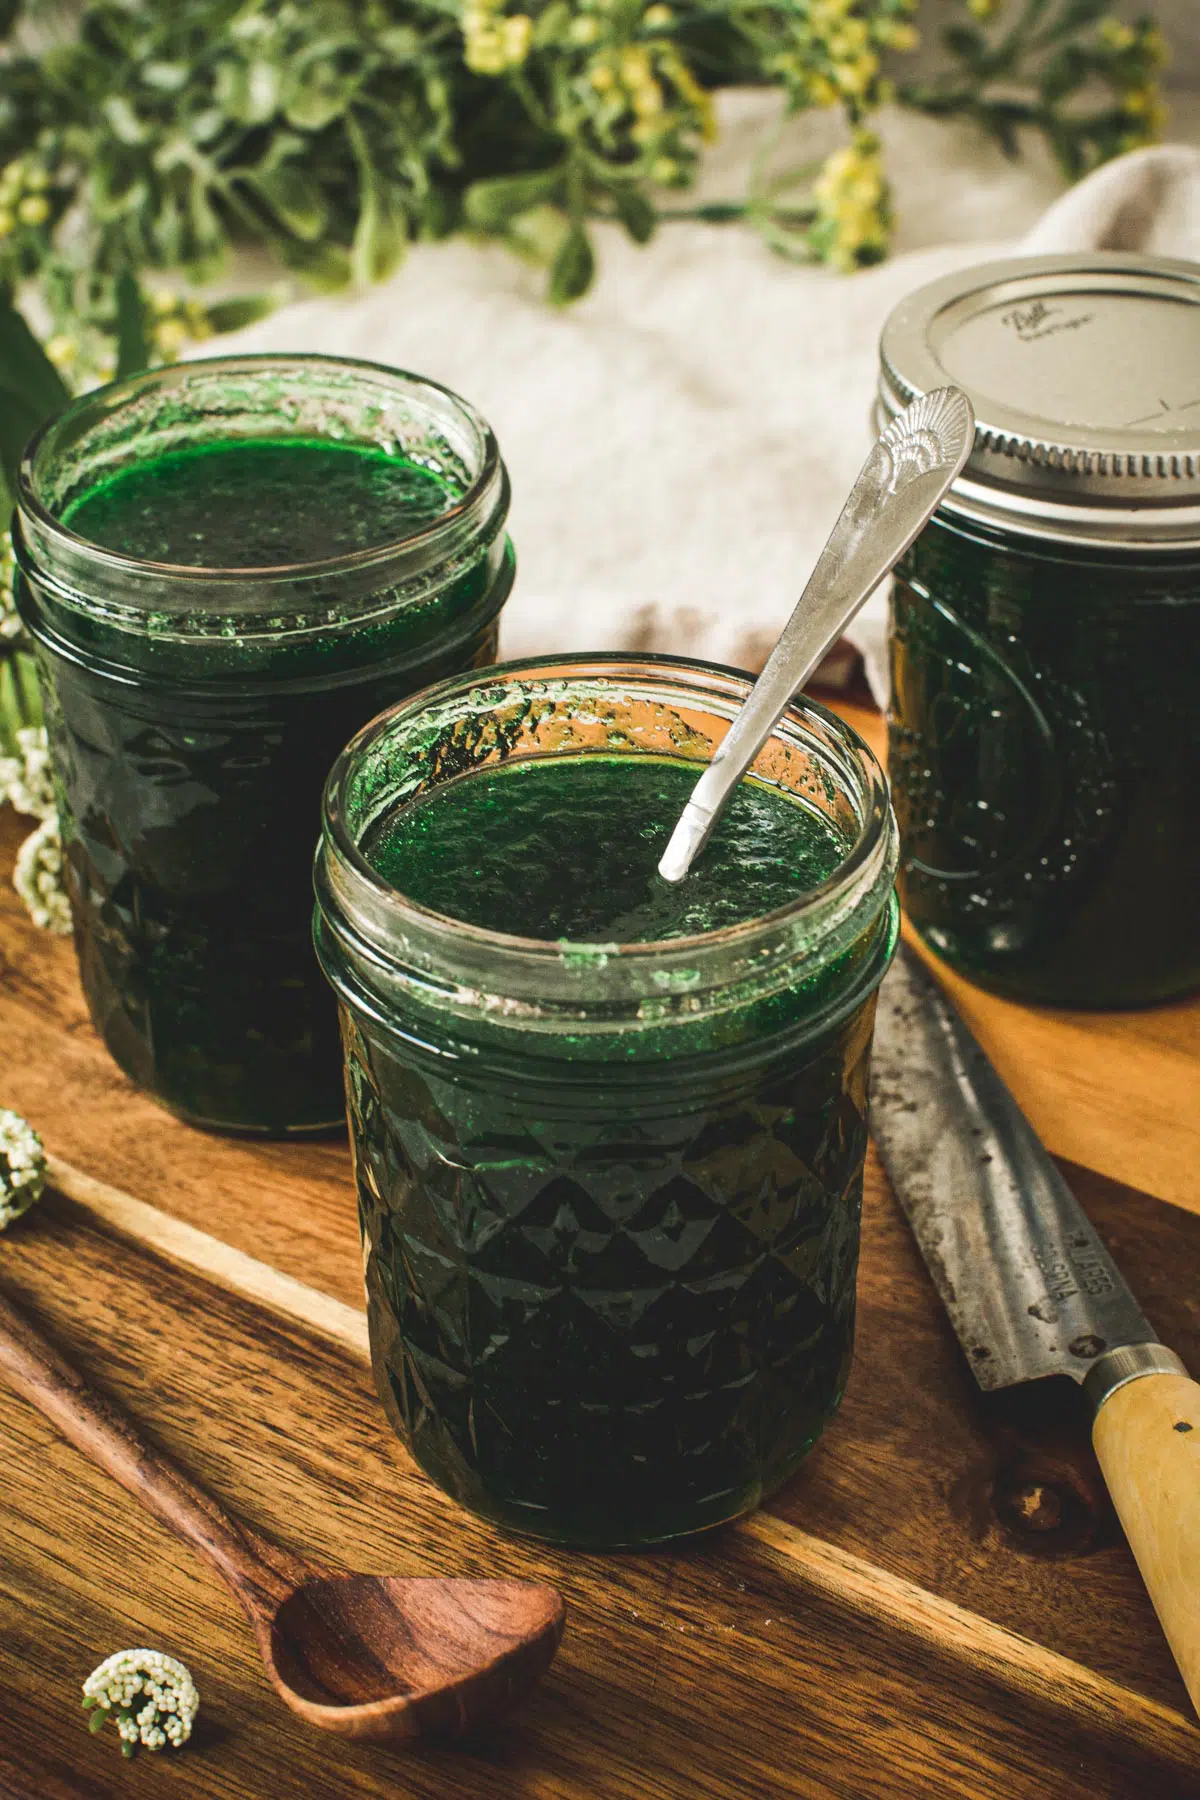 Jalapeno pepper jelly in a glass jar with a silver serving spoon inside.